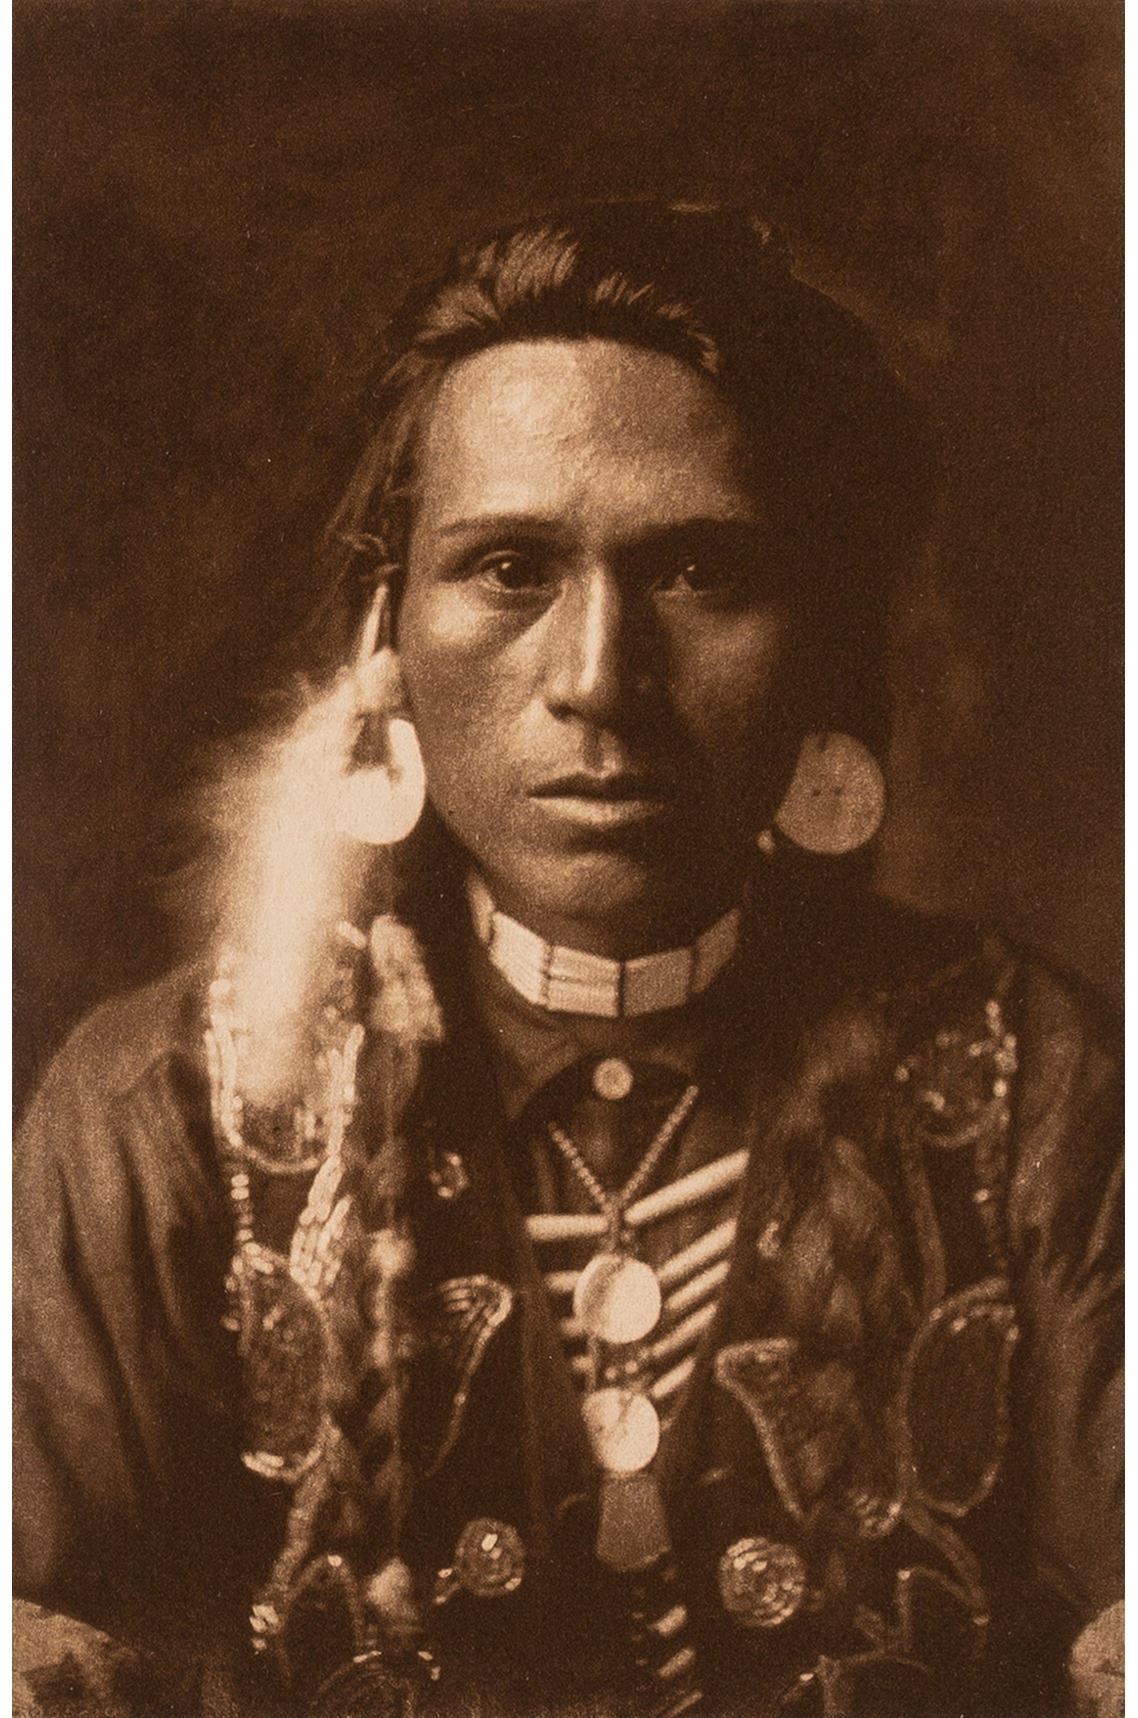 71 Works: The North American Indian, Volume 7: The Indians of the United States and Alaska by Edward S. Curtis, 1911